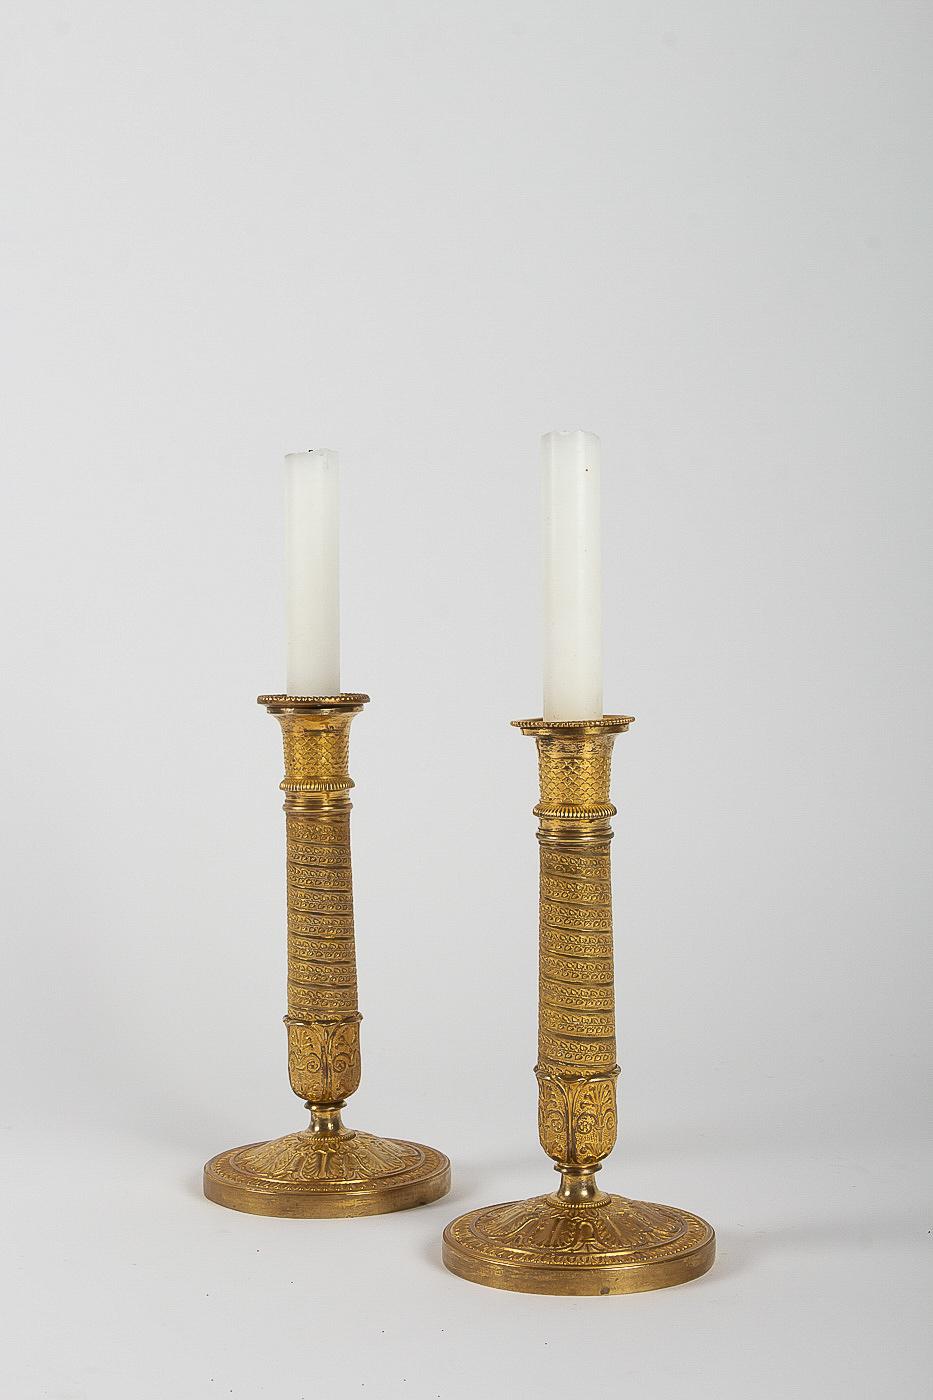 French Empire Period, Pair of Small Chiseled Gilt-Bronze Candlesticks Circa 1805 7